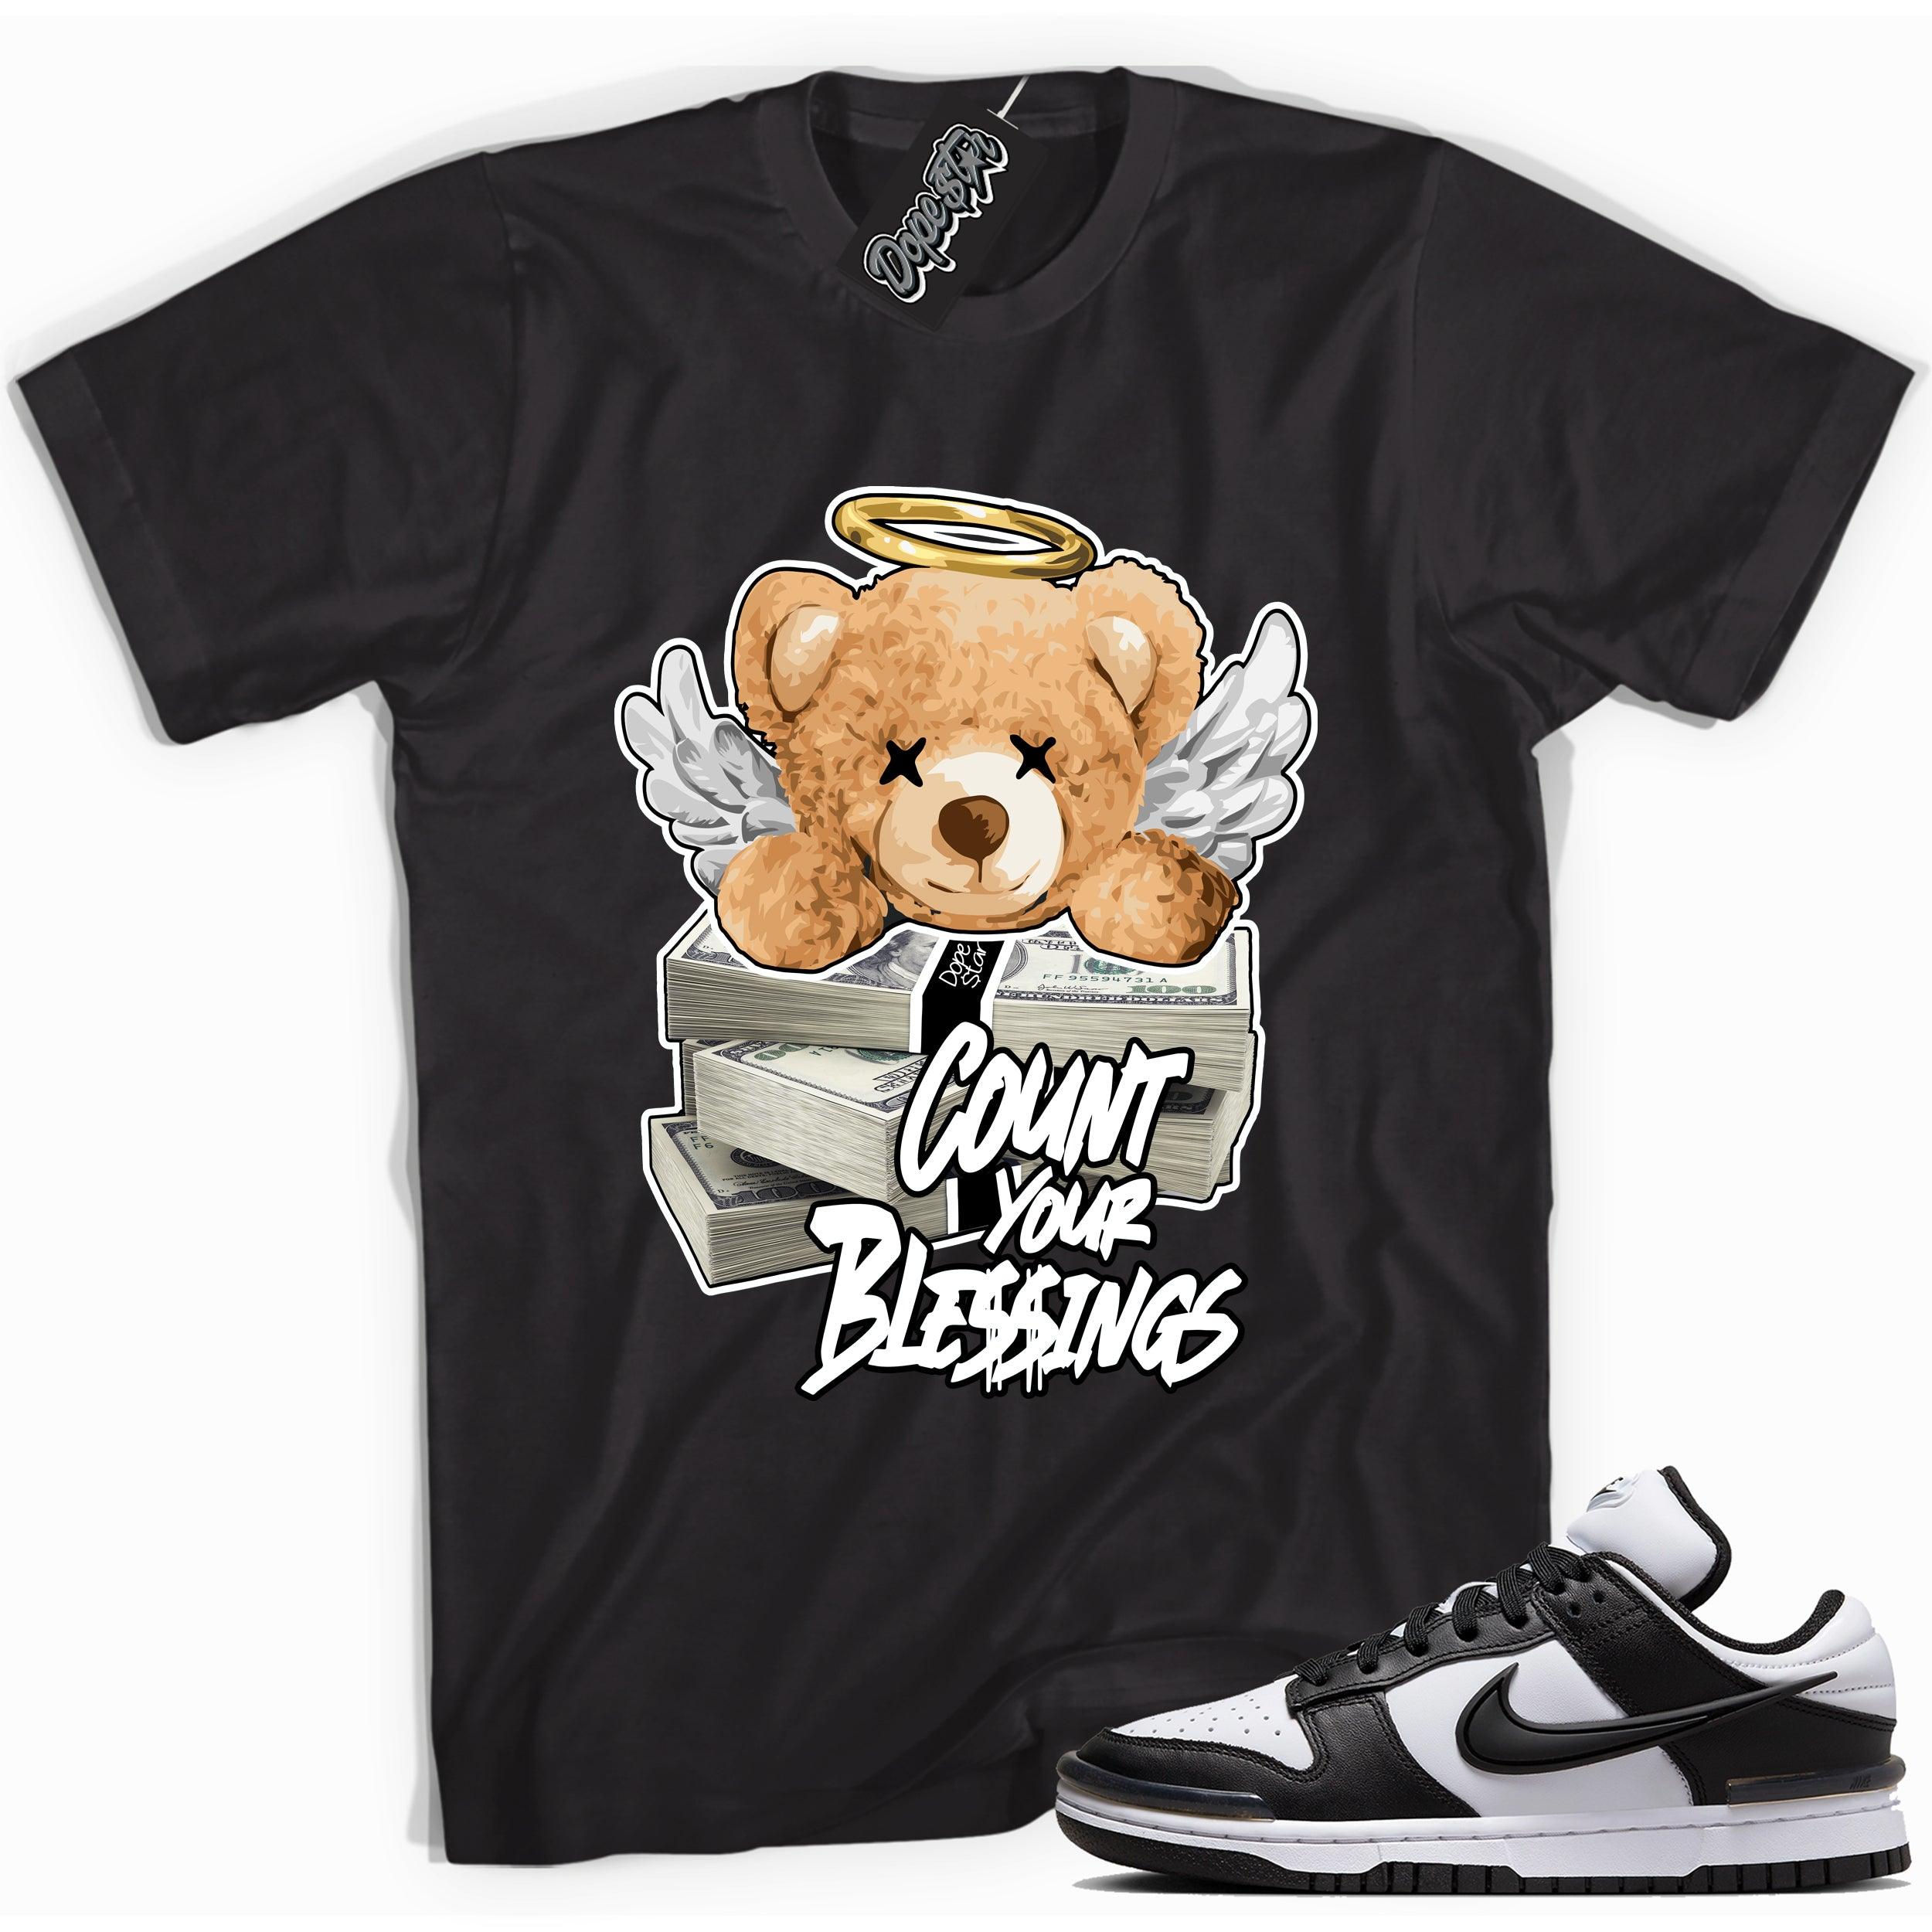 Cool black graphic tee with 'count your blessings' print, that perfectly matches Nike Dunk Low Twist Panda sneakers.